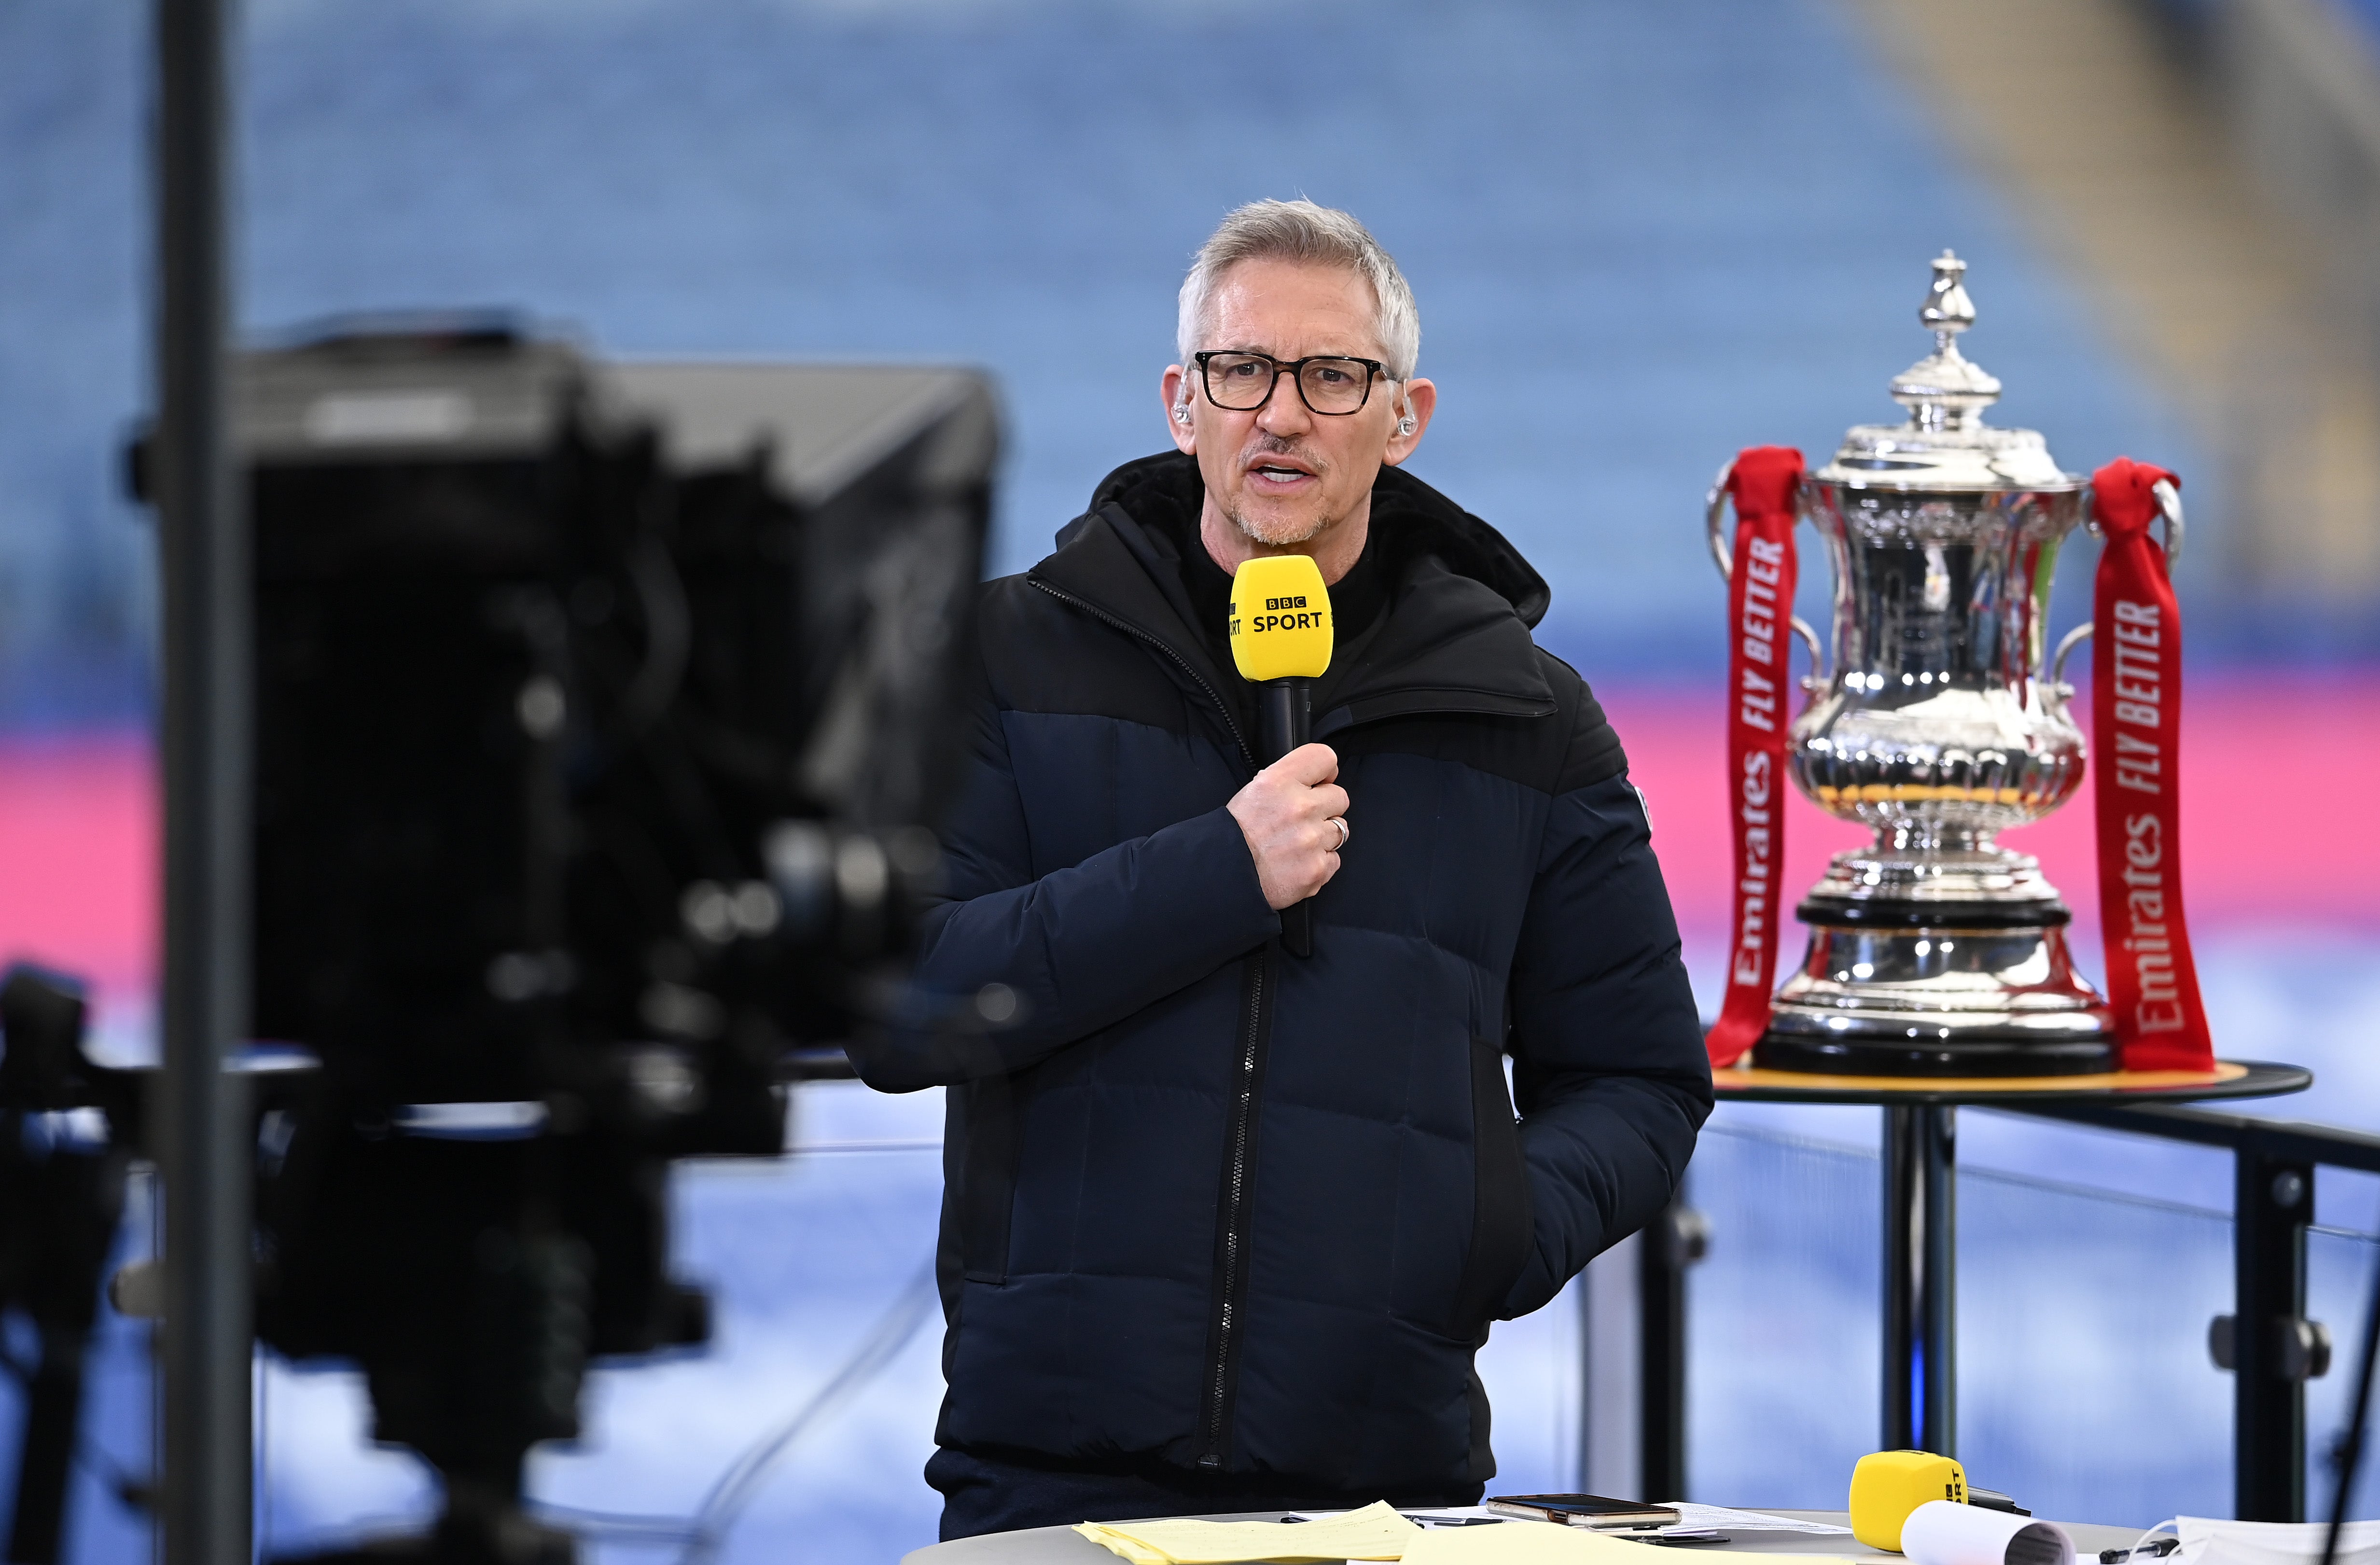 Gary Lineker presenting the FA Cup final on the BBC